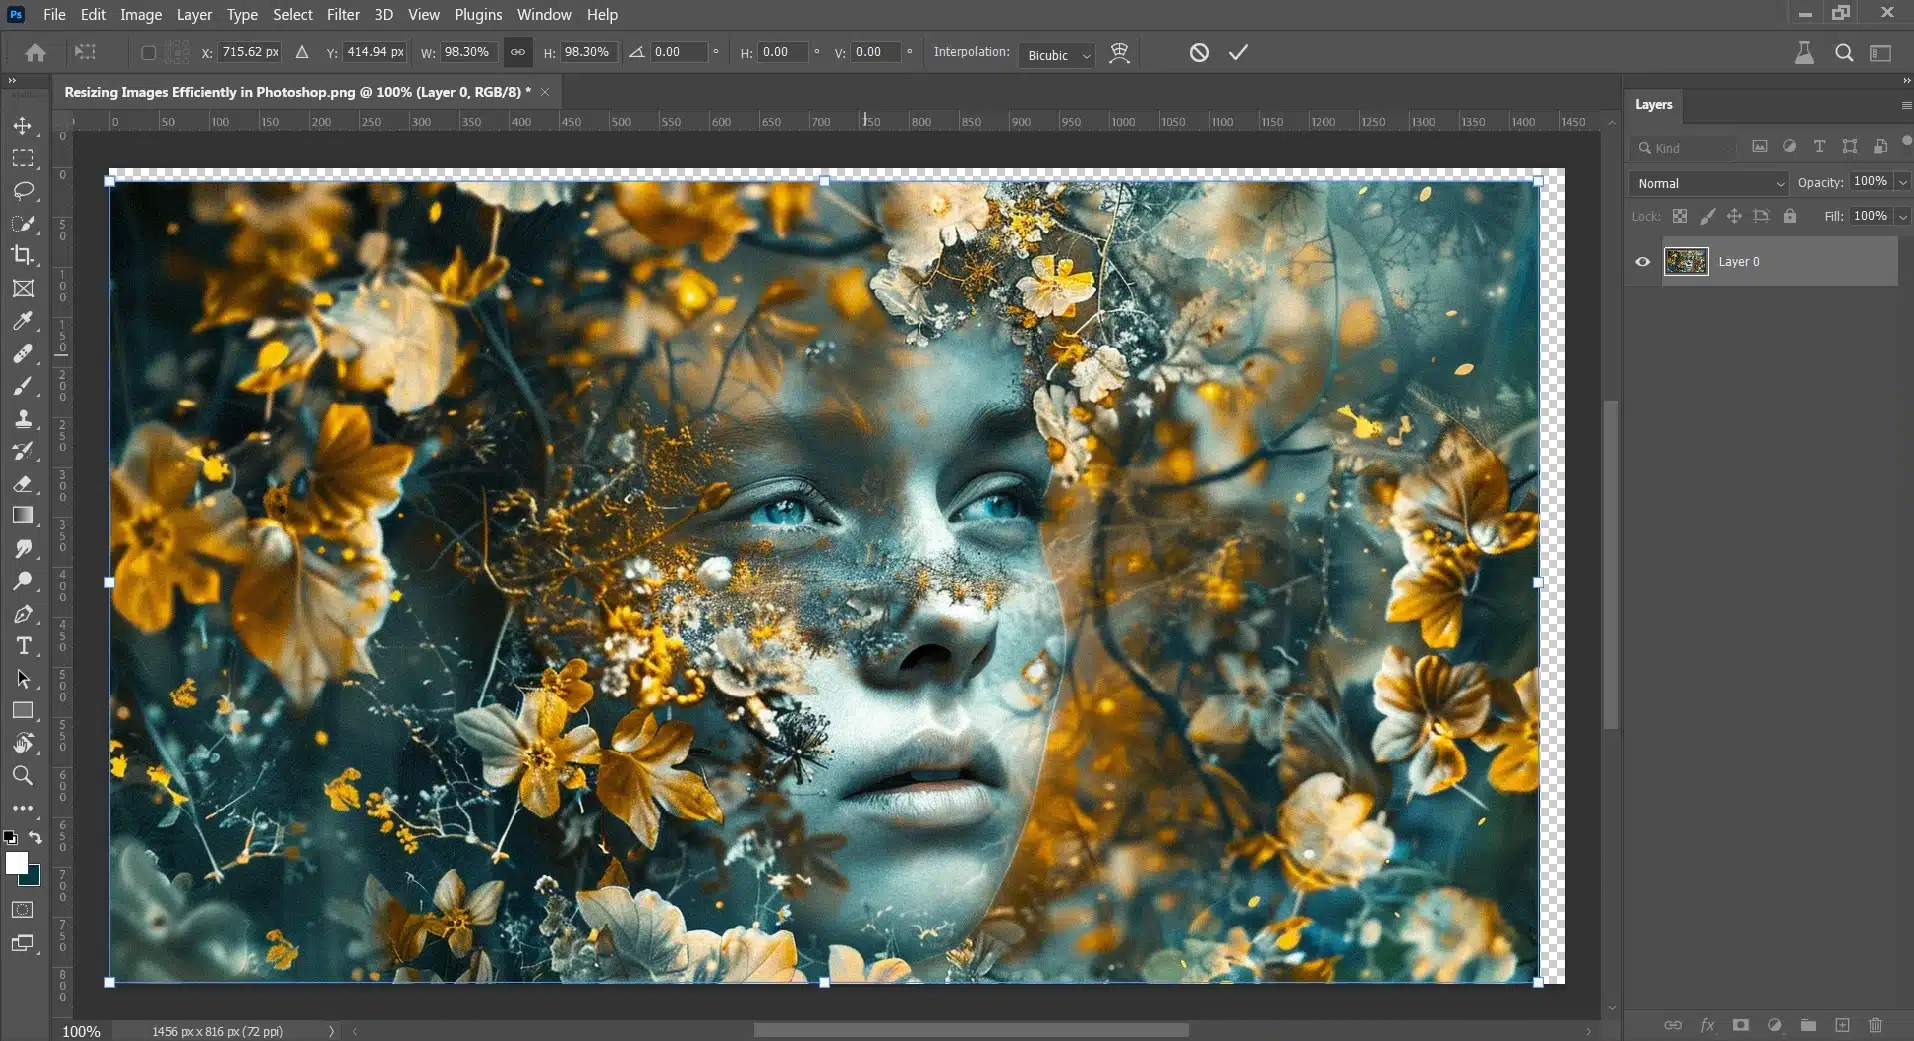 Photoshop interface with an image of a face surrounded by flowers being resized.